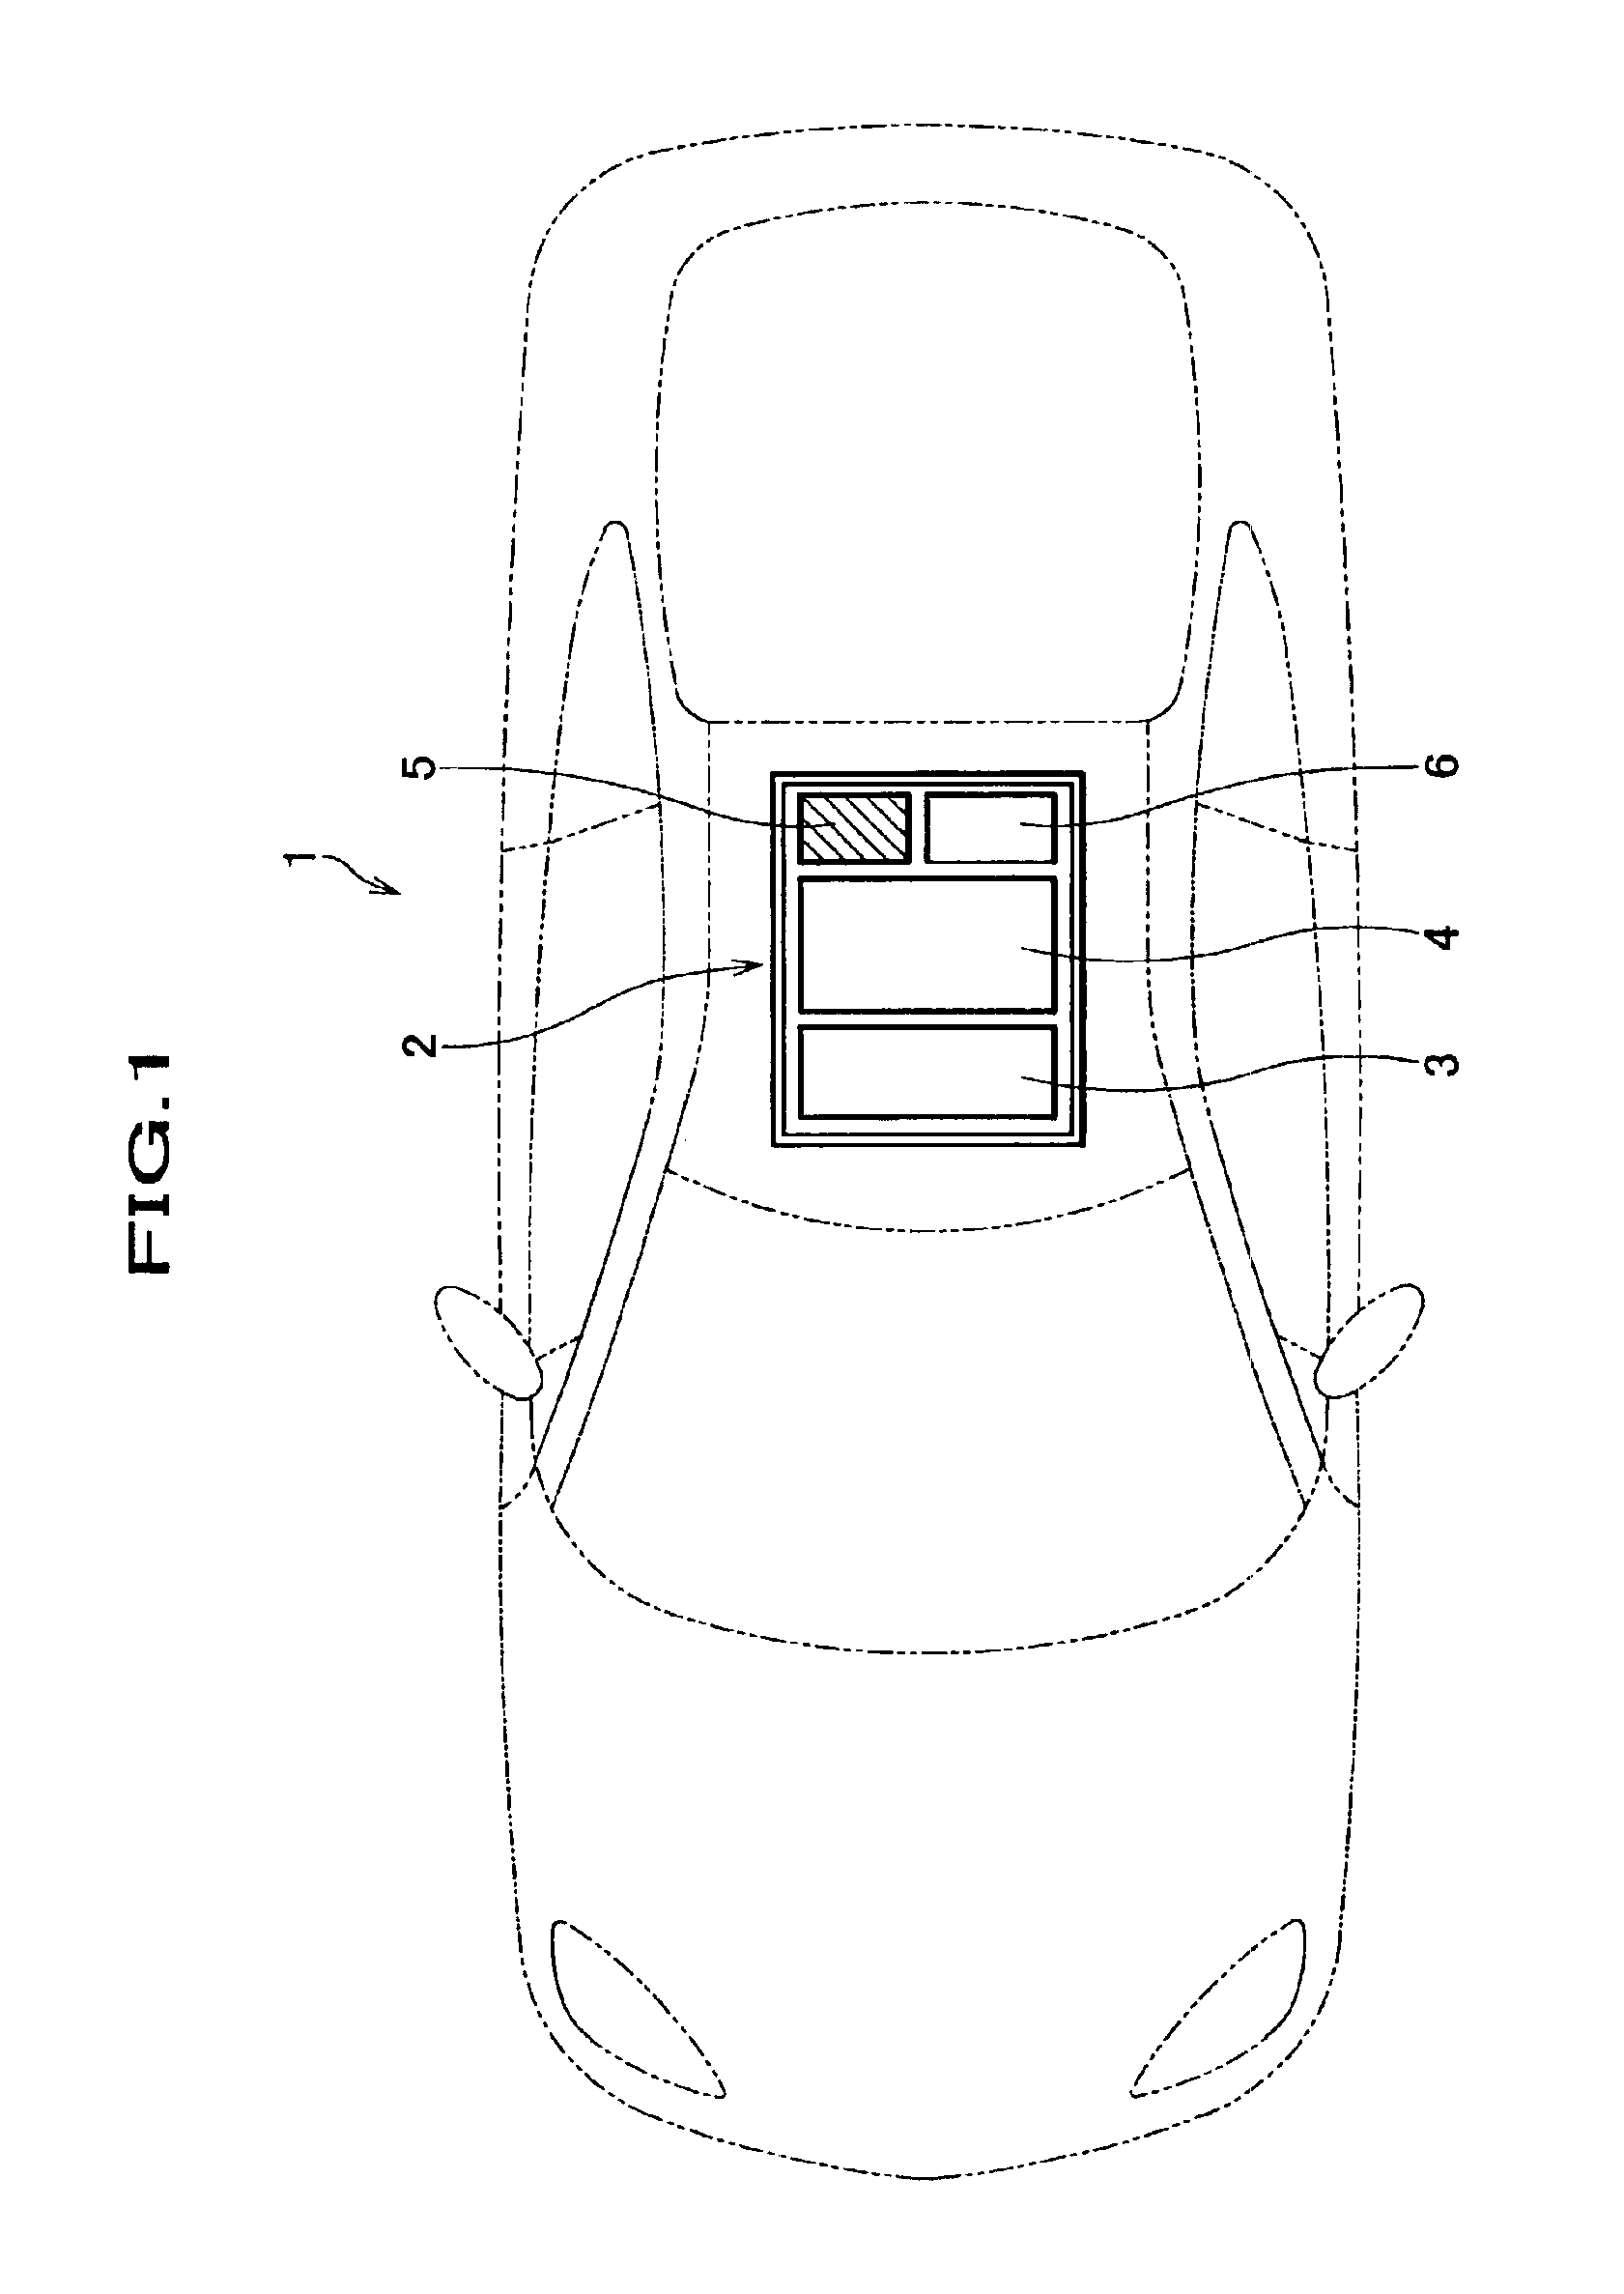 Discharged fuel diluter and discharged fuel dilution-type fuel cell system